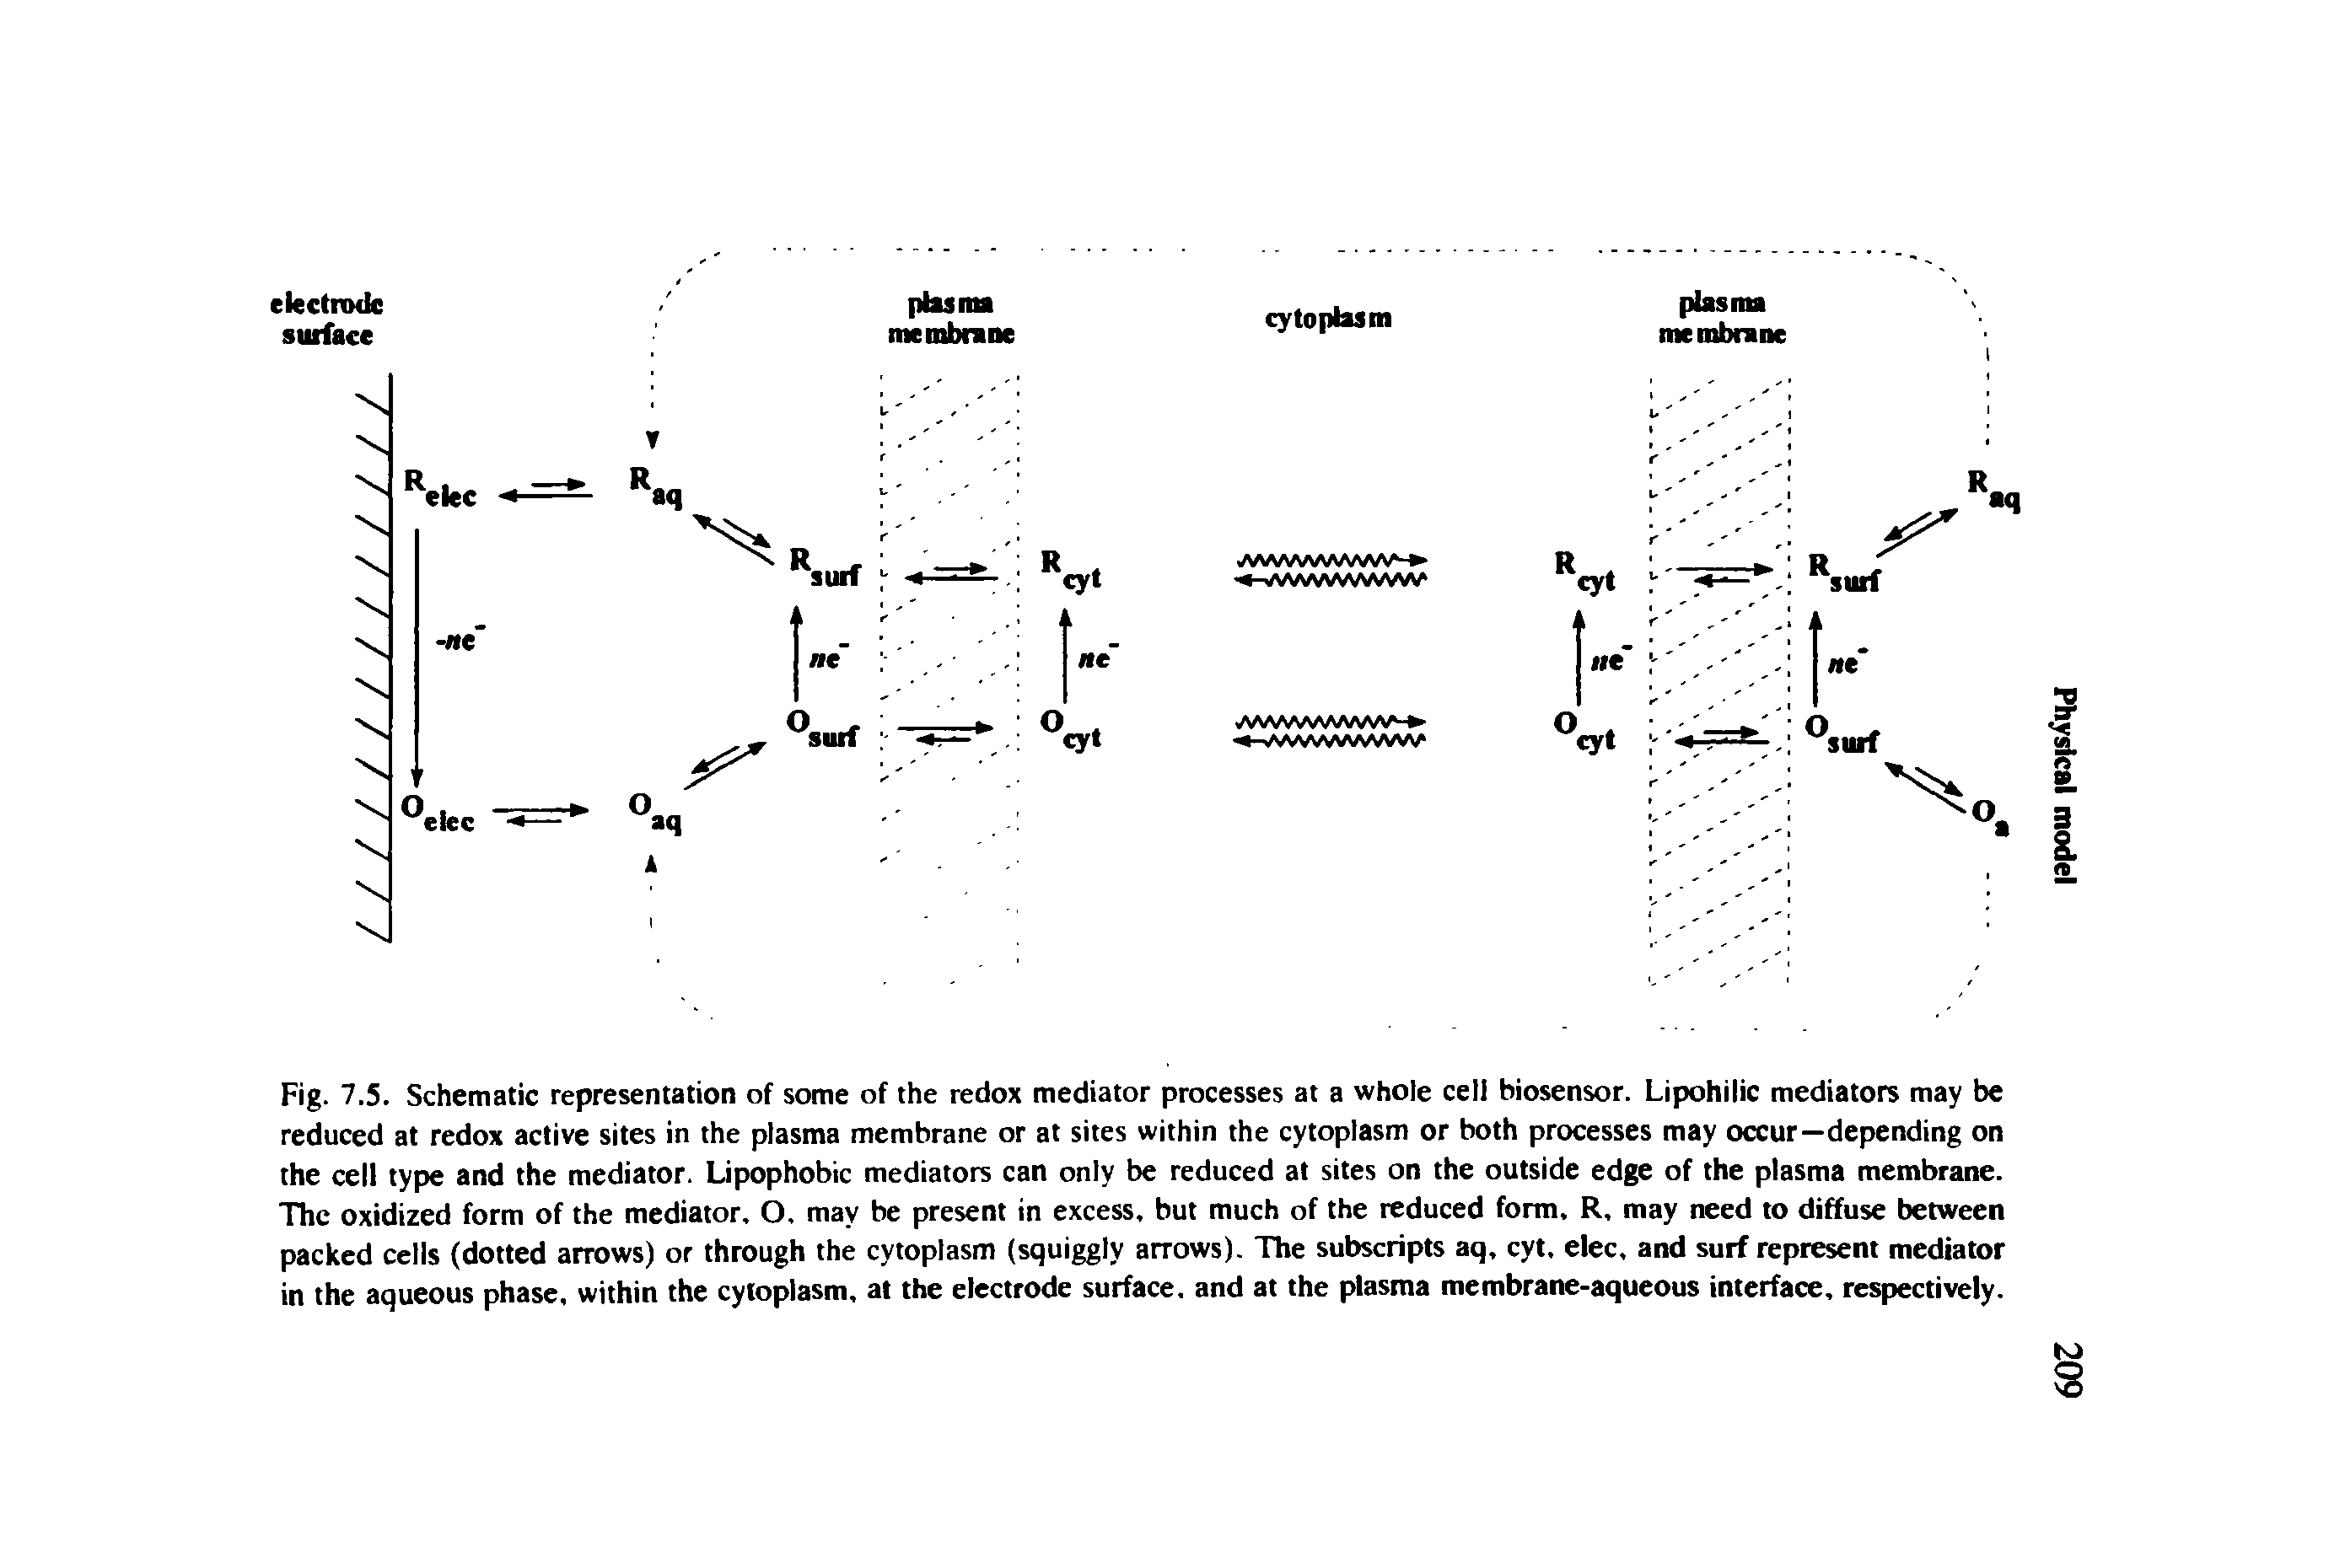 Fig. 7.5. Schematic representation of some of the redox mediator processes at a whole cell biosensor. Lipohilic mediators may be reduced at redox active sites in the plasma membrane or at sites within the cytoplasm or both processes may occur—depending on the cell type and the mediator. Lipophobic mediators can only be reduced at sites on the outside edge of the plasma membrane. The oxidized form of the mediator. O, may be present in excess, but much of the reduced form. R, may need to diffuse between packed cells (dotted arrows) or through the cytoplasm (squiggly arrows). The subscripts aq, cyt, elec, and surf represent mediator in the aqueous phase, within the cytoplasm, at the electrode surface, and at the plasma membrane-aqueous interface, respectively.